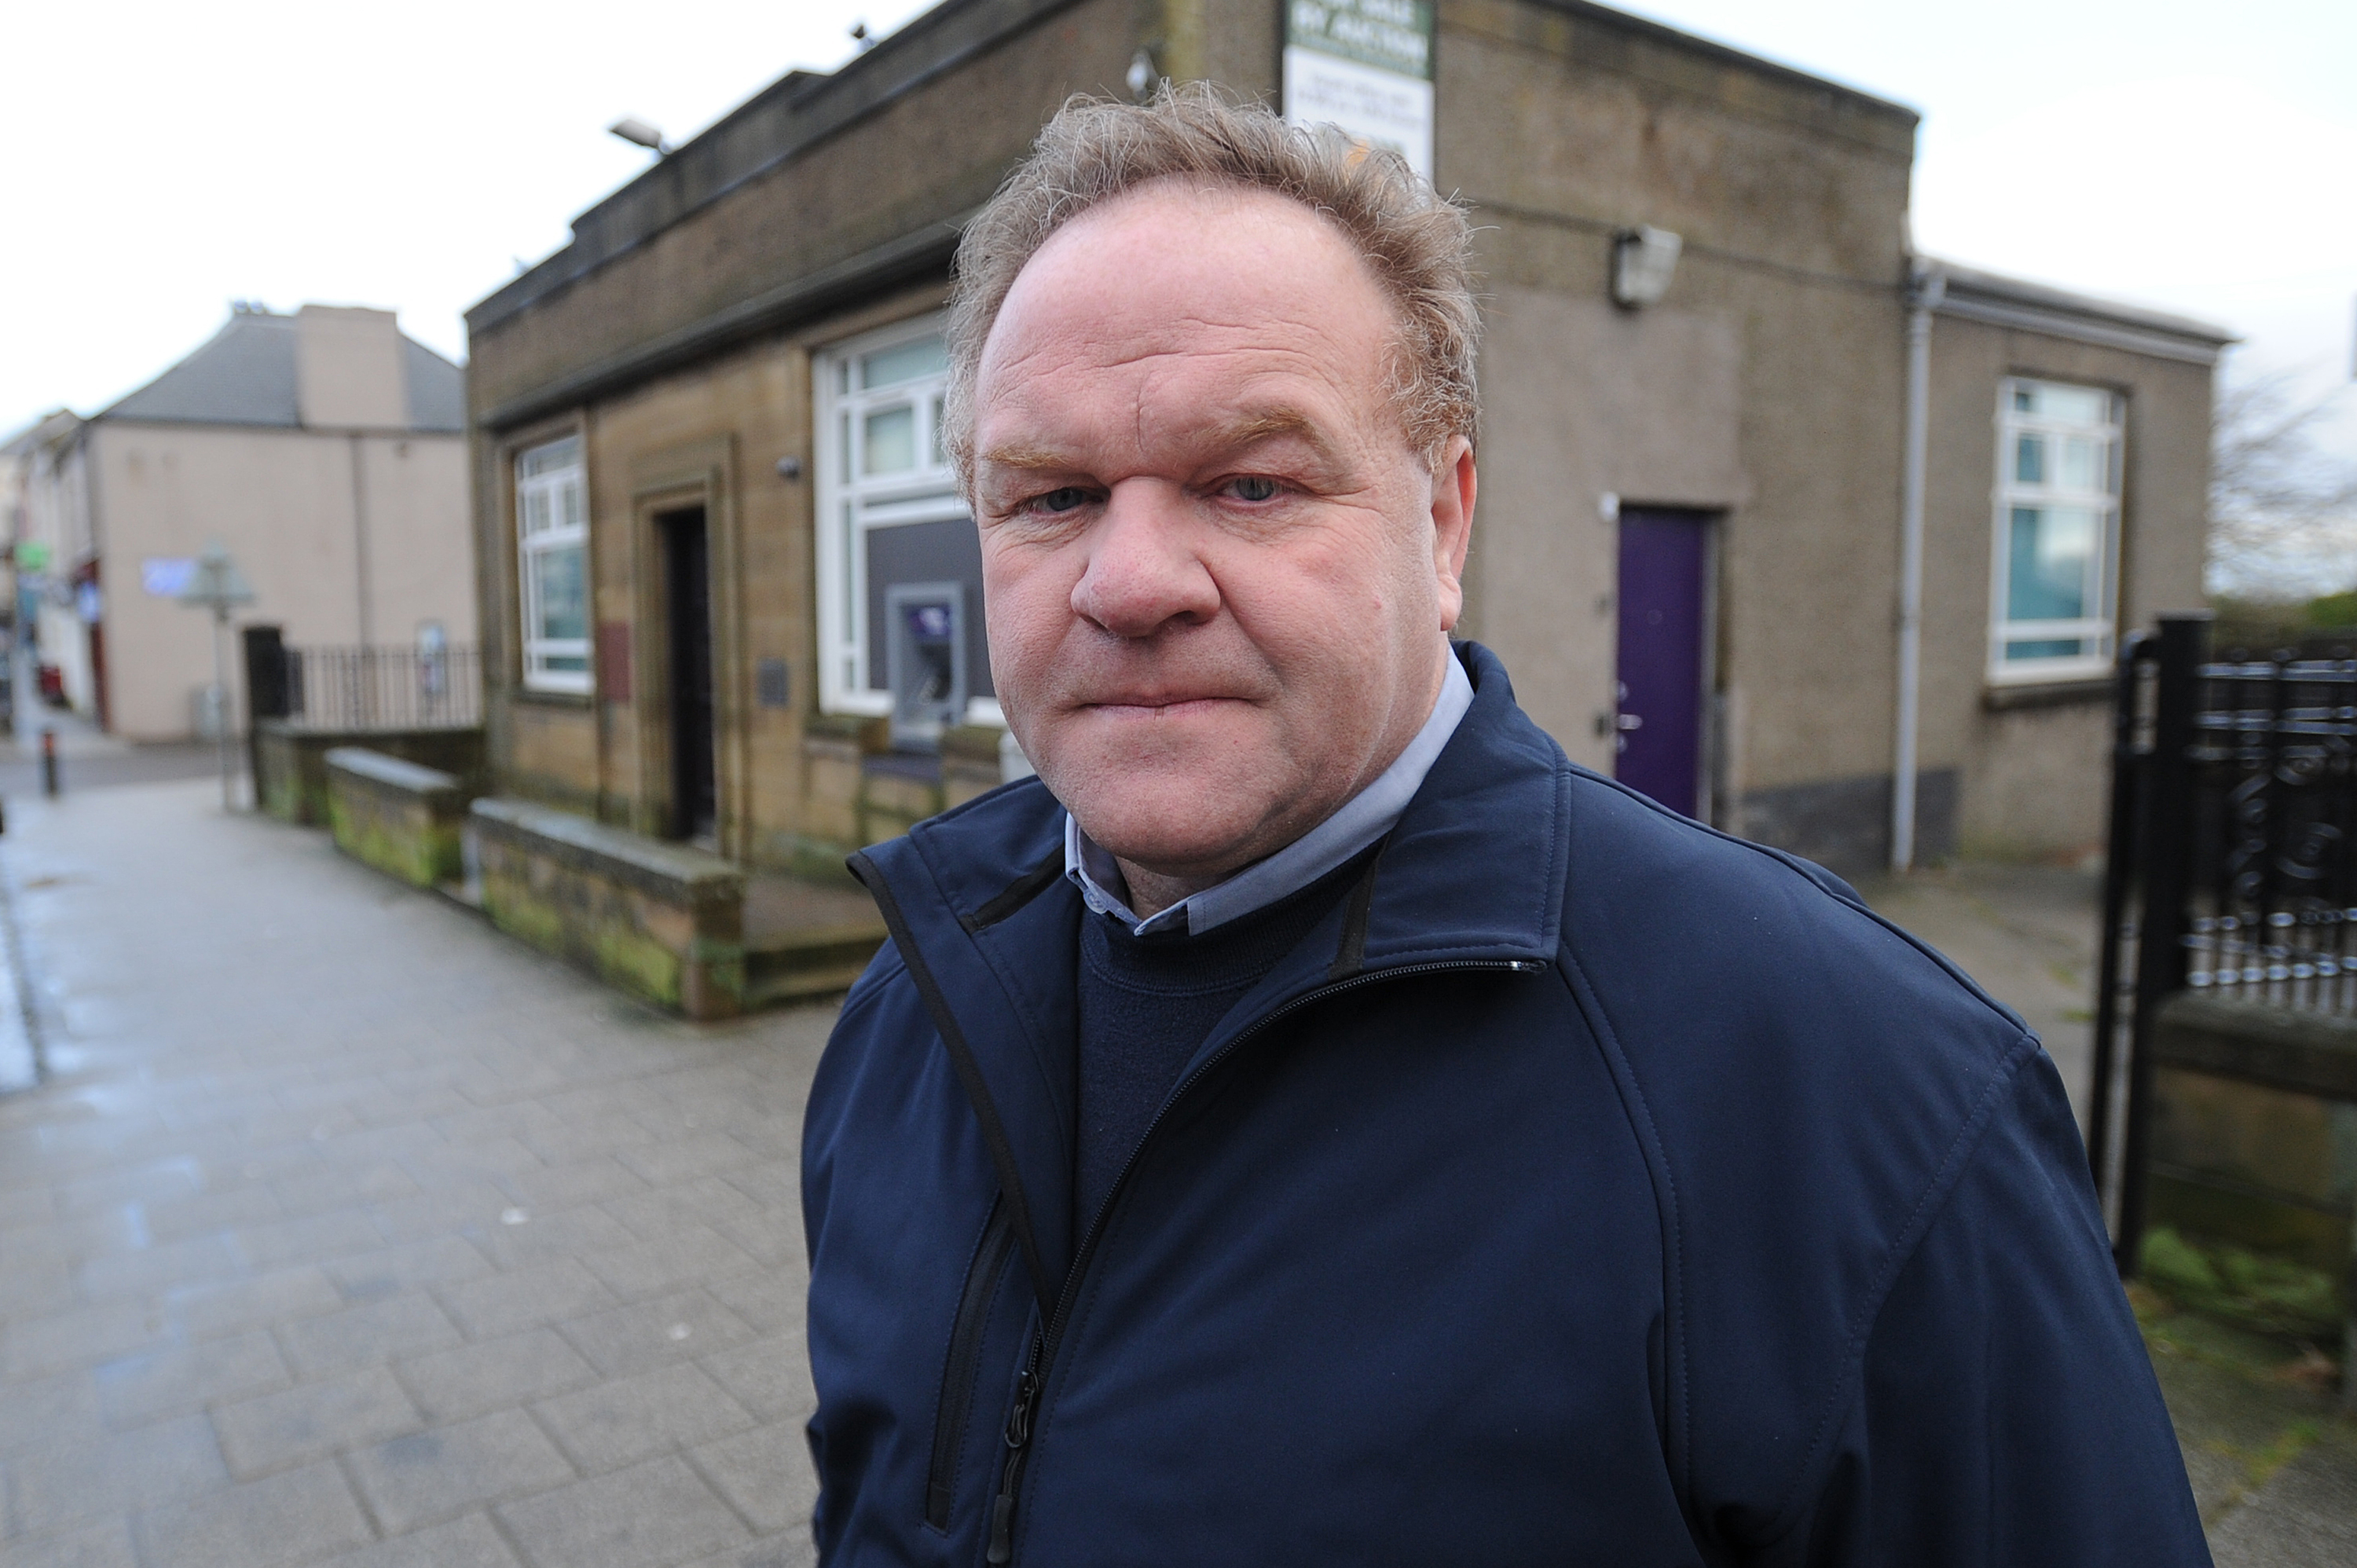 Councillor Alex Campbell has expressed his concerns over the situation.